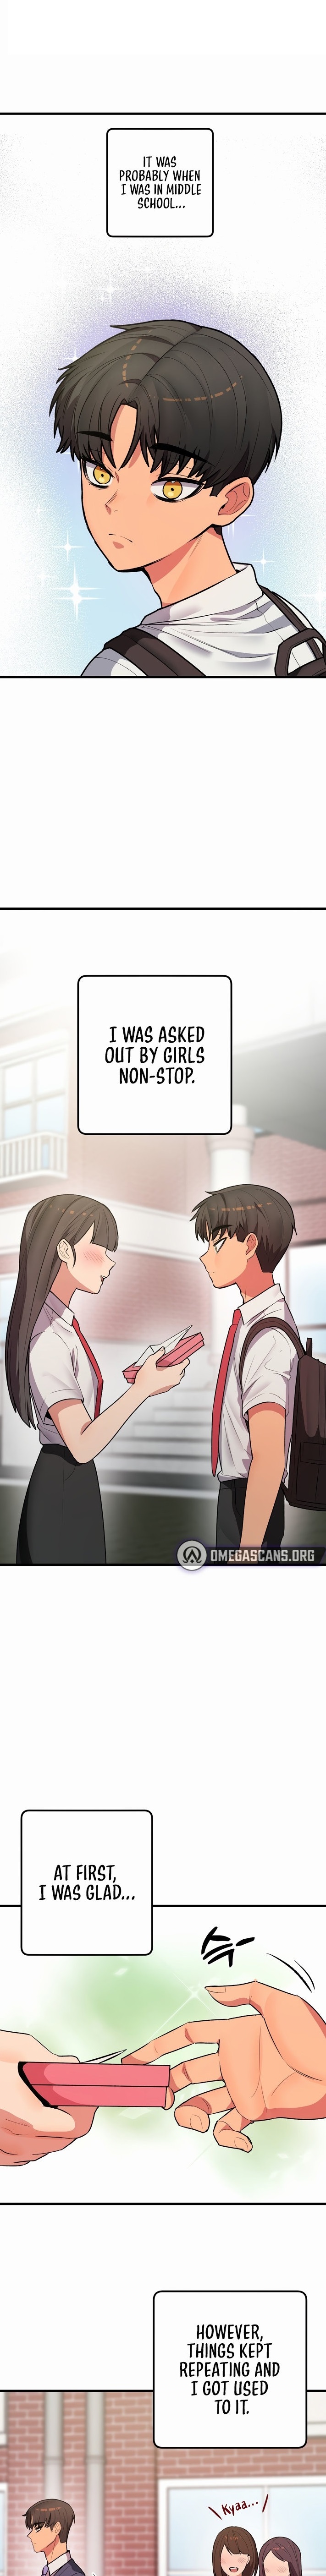 [Dating Sim Short Story] The Dating Simulator Cheat Code - Chapter 6 Page 1